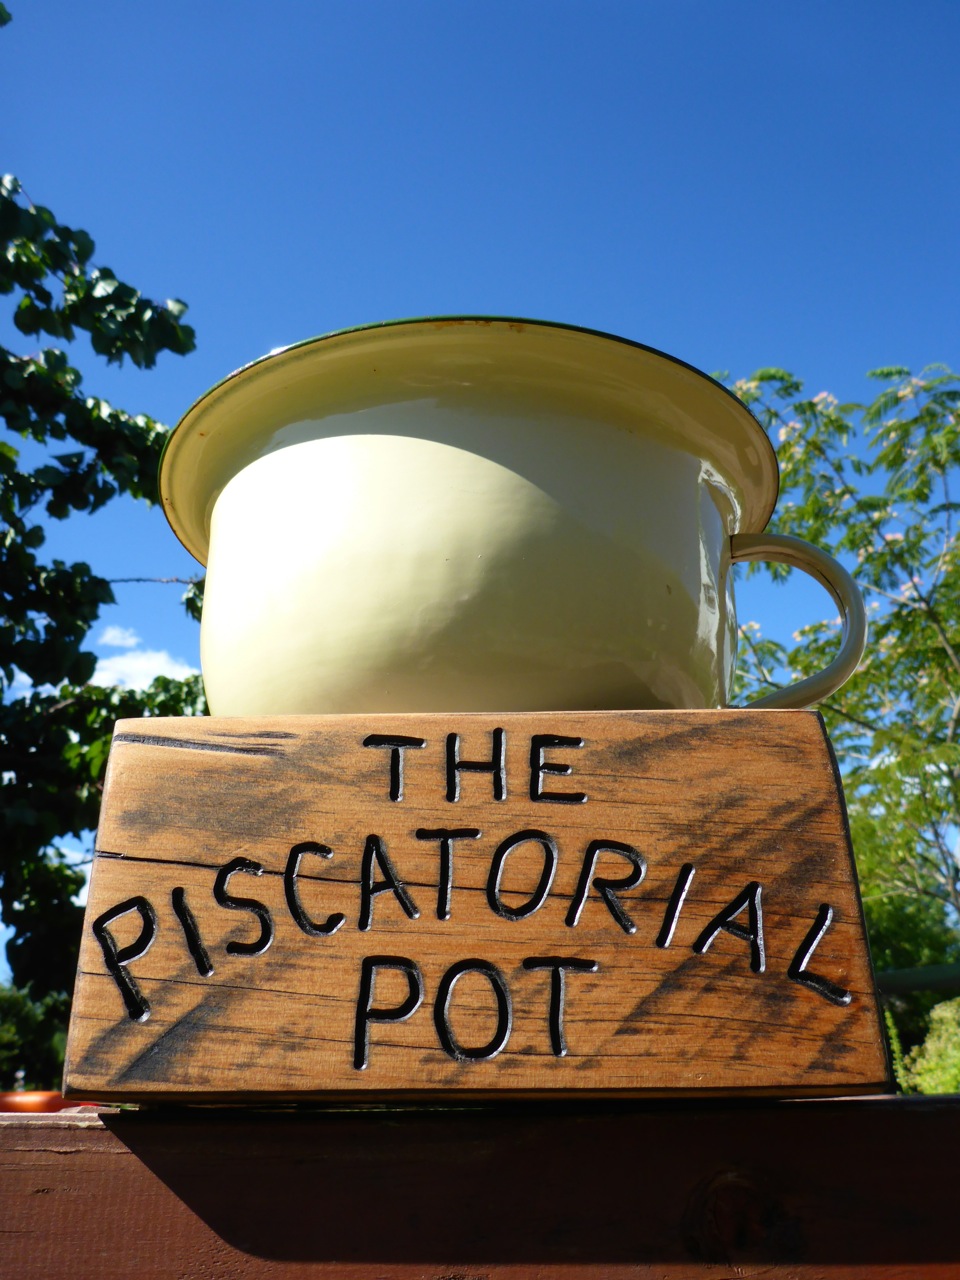 The Piscatorial Pot competition was a great success once again!